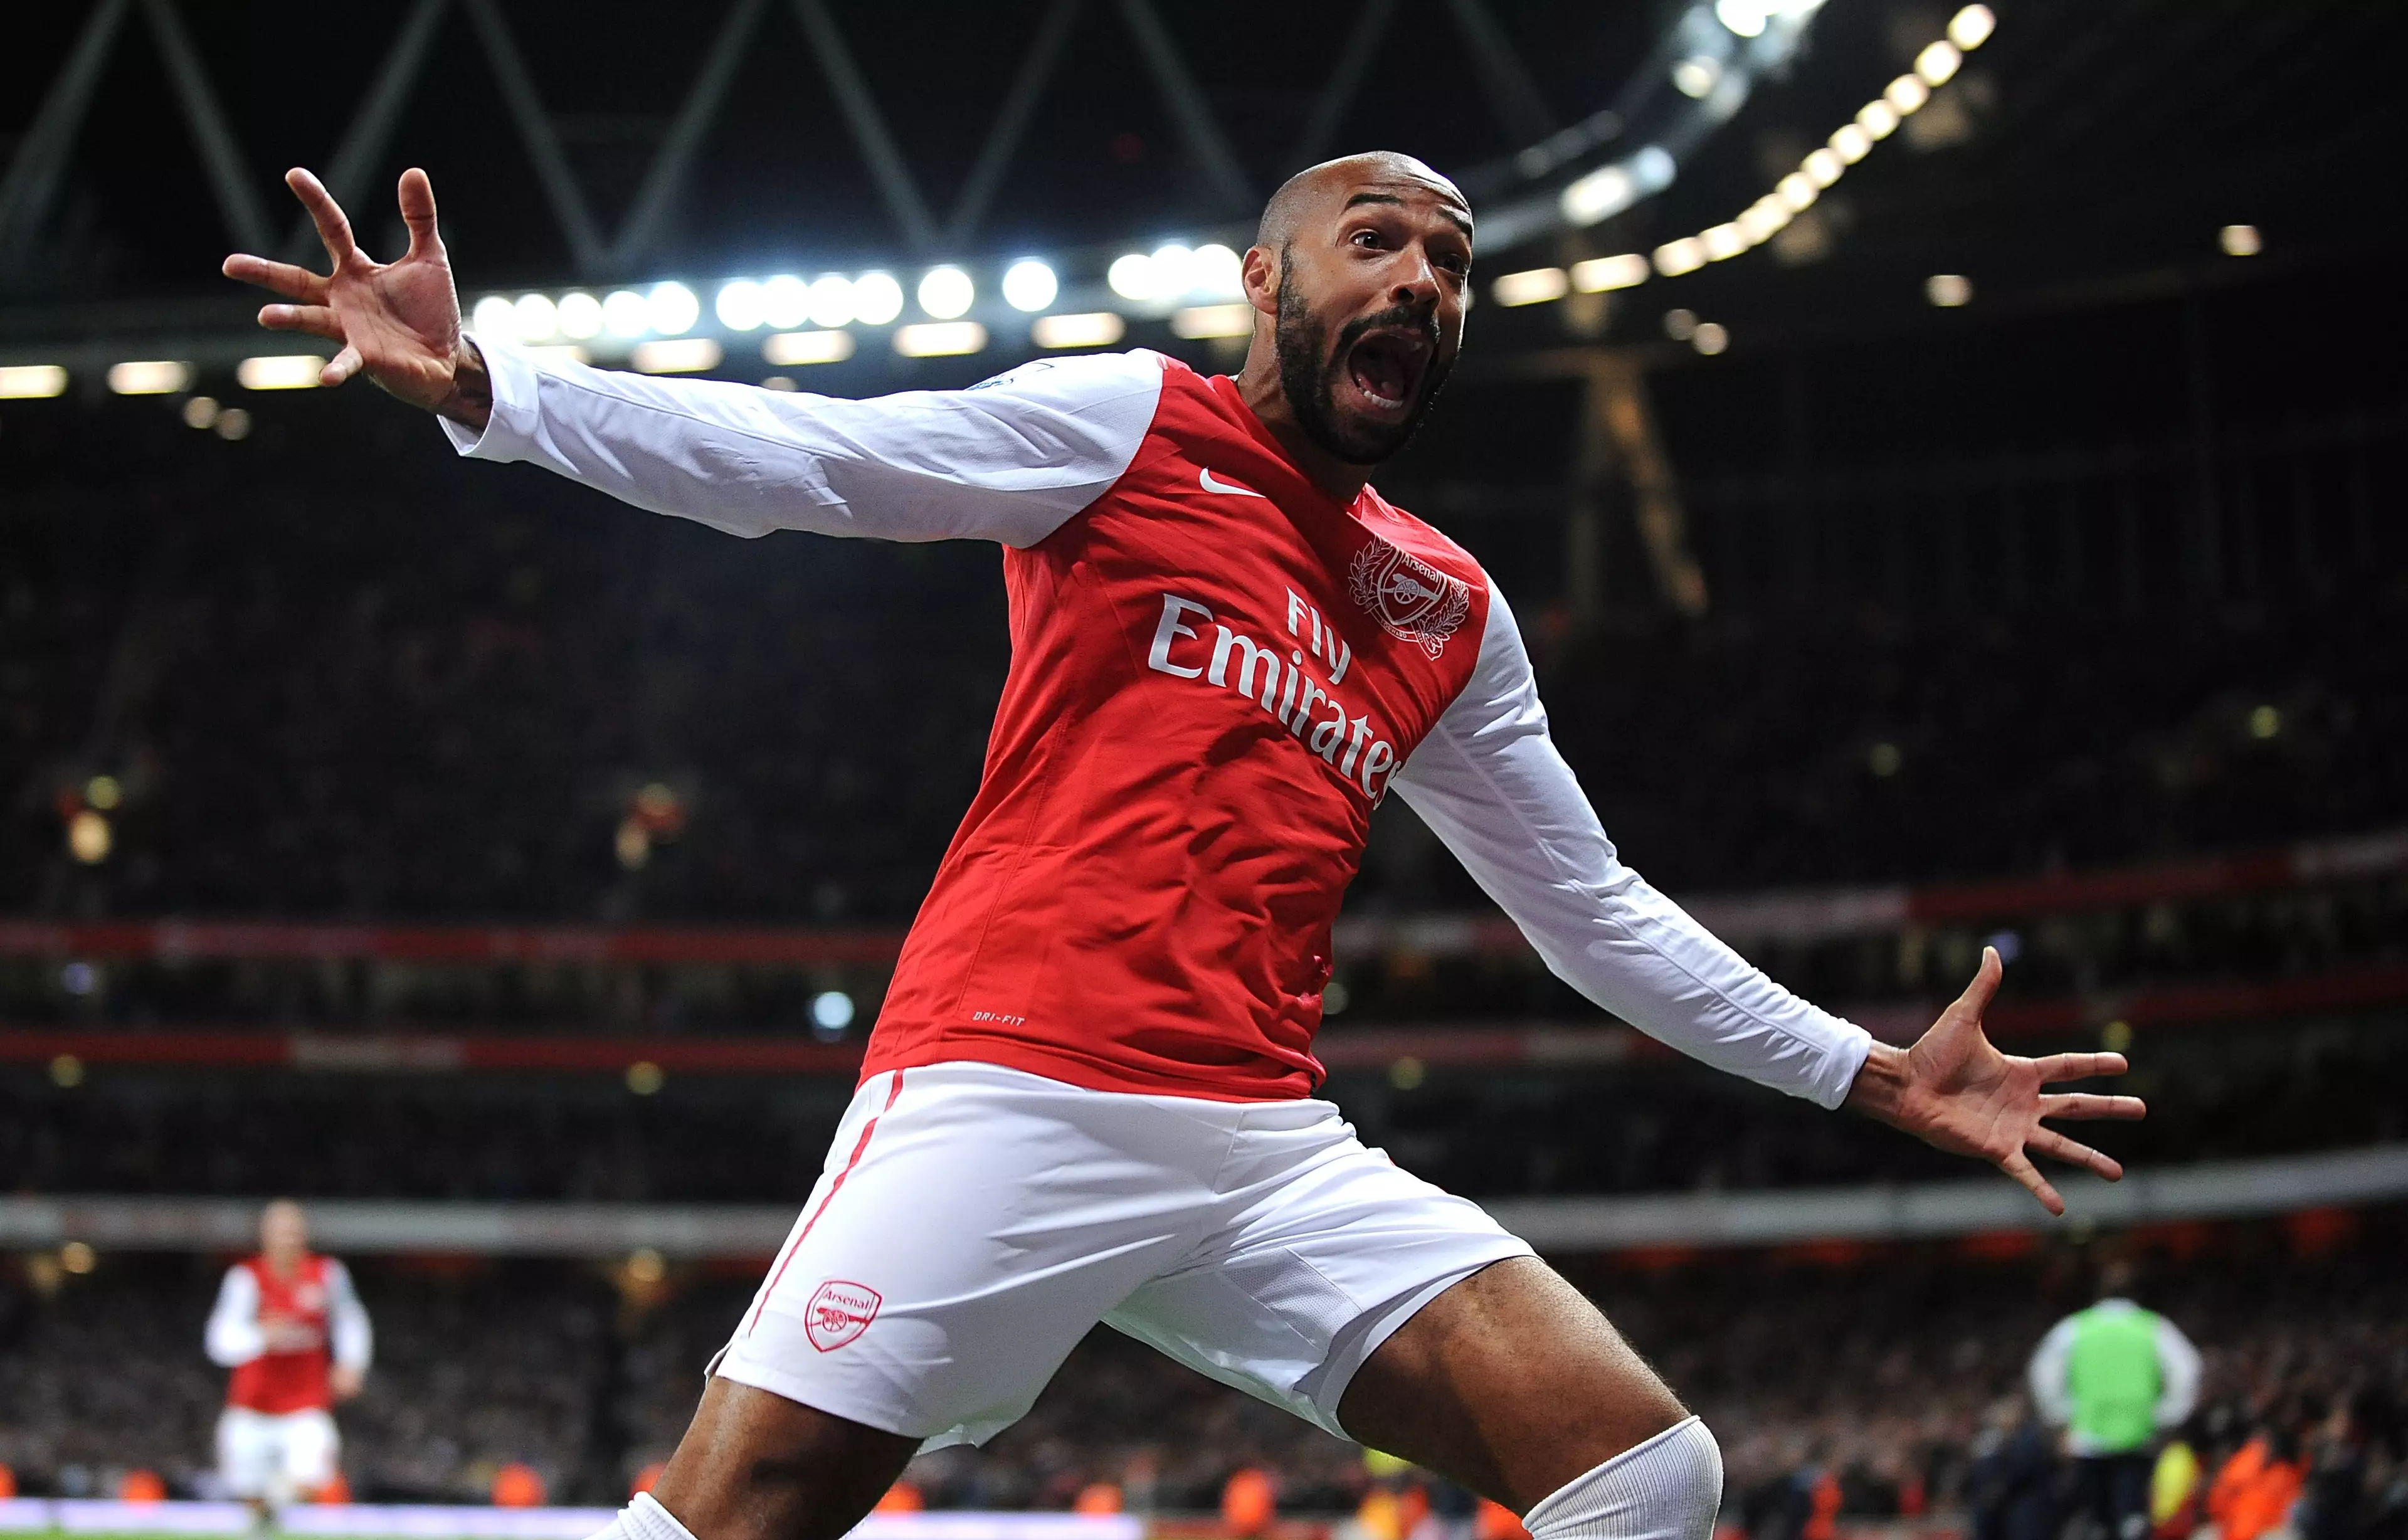 Arsenal's Thierry Henry celebrates scoring the opening goal of the game. Image: PA